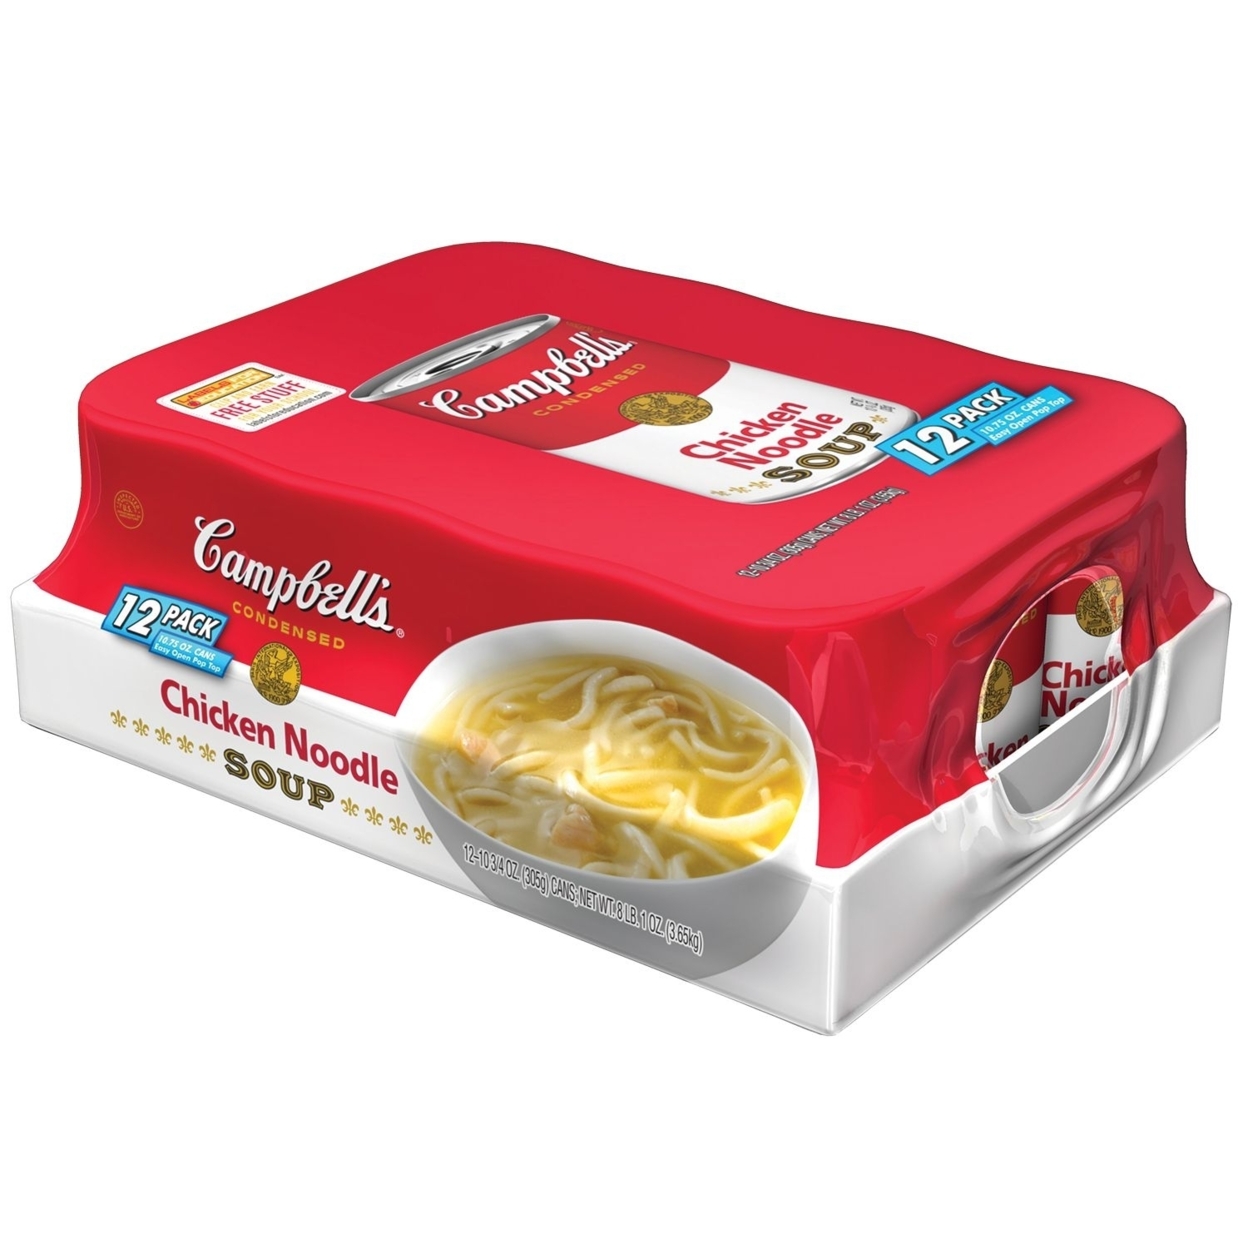 Campbell's Condensed Chicken Noodle Soup, 10.75 Ounce (12 Count)